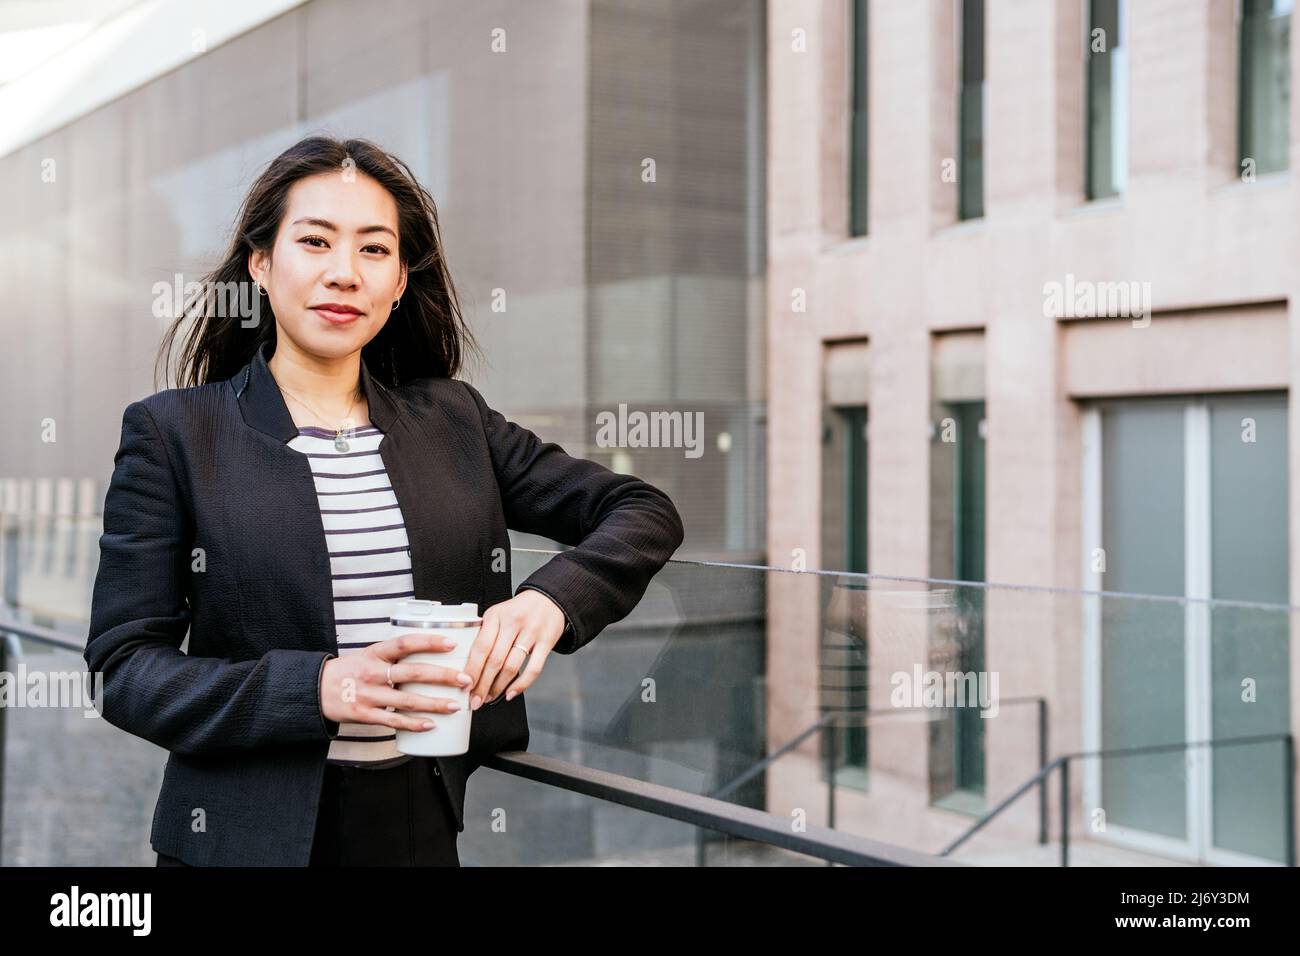 Young ethnic elegant female executive worker in black suit standing with zero waste tumbler bottle for coffee break in office district Stock Photo